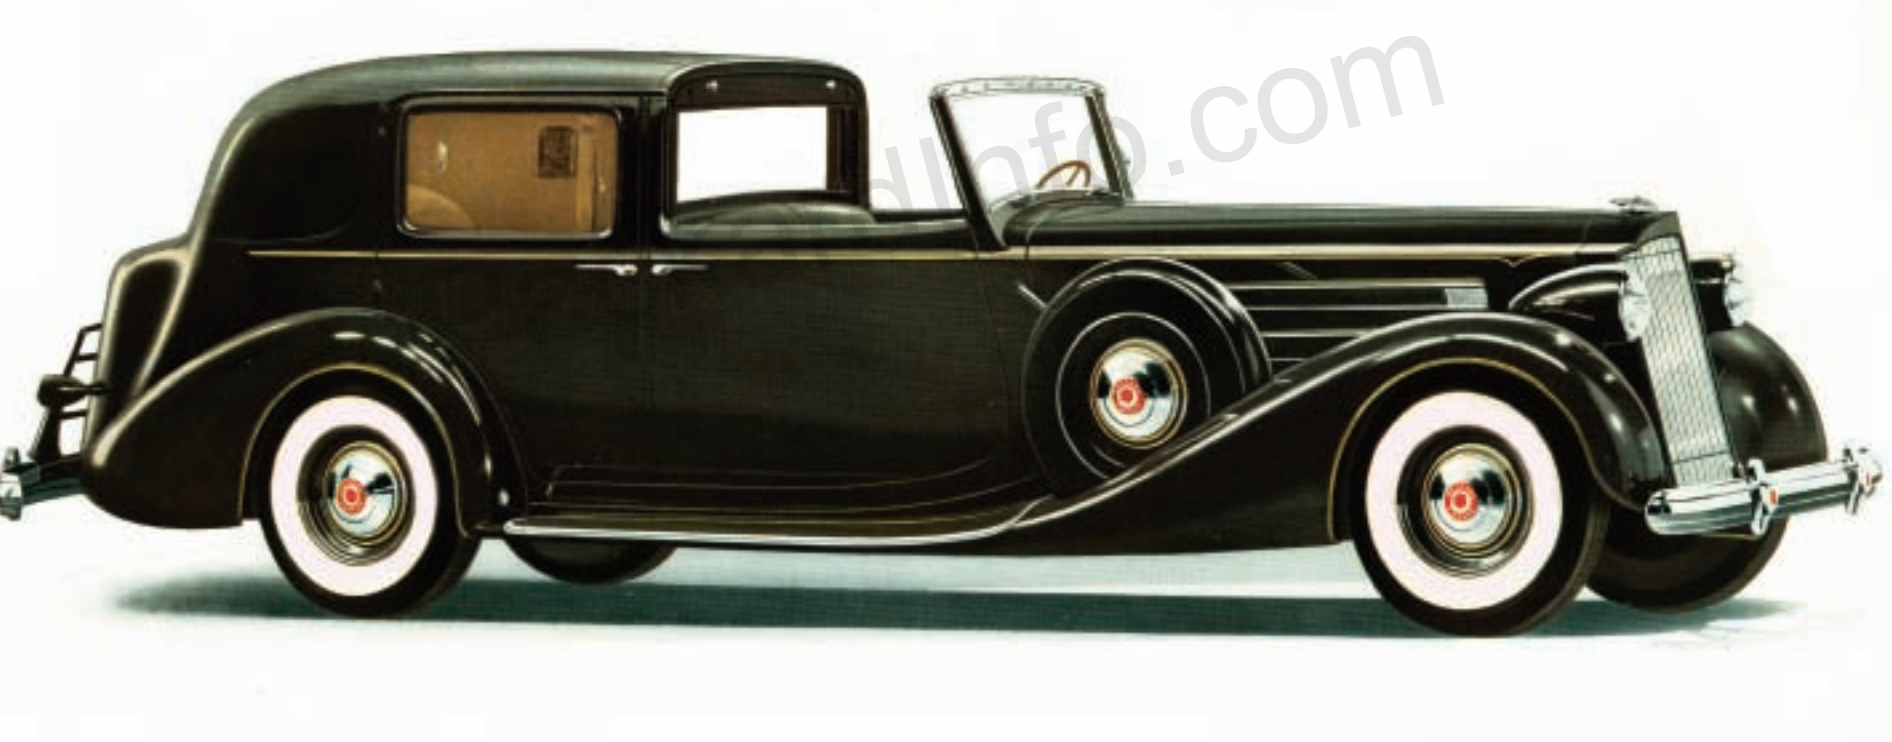 1937 15th L-394 Twelve All Weather Cabriolet by LeBarron